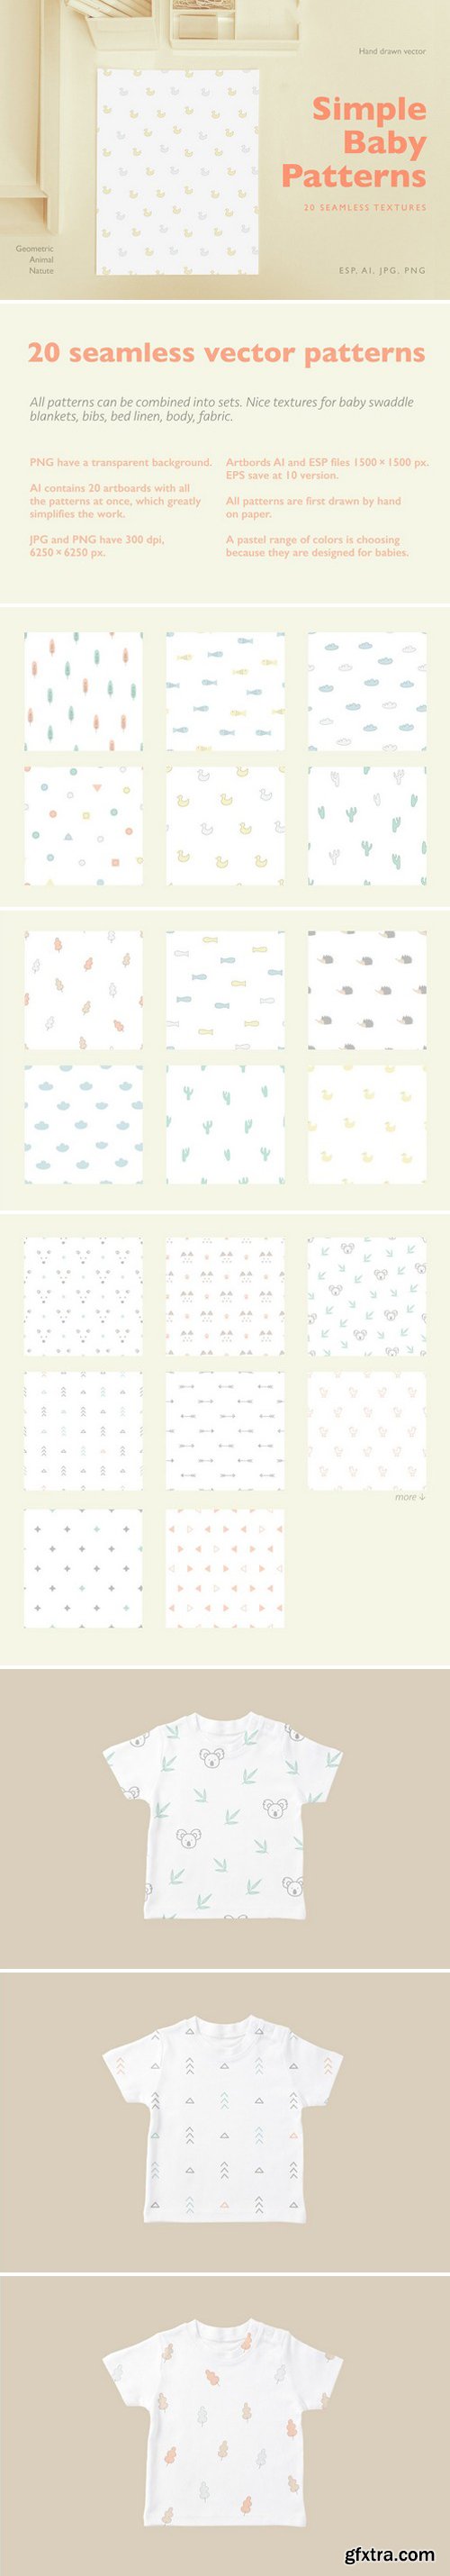 CM - Simple Baby Patterns 1608555